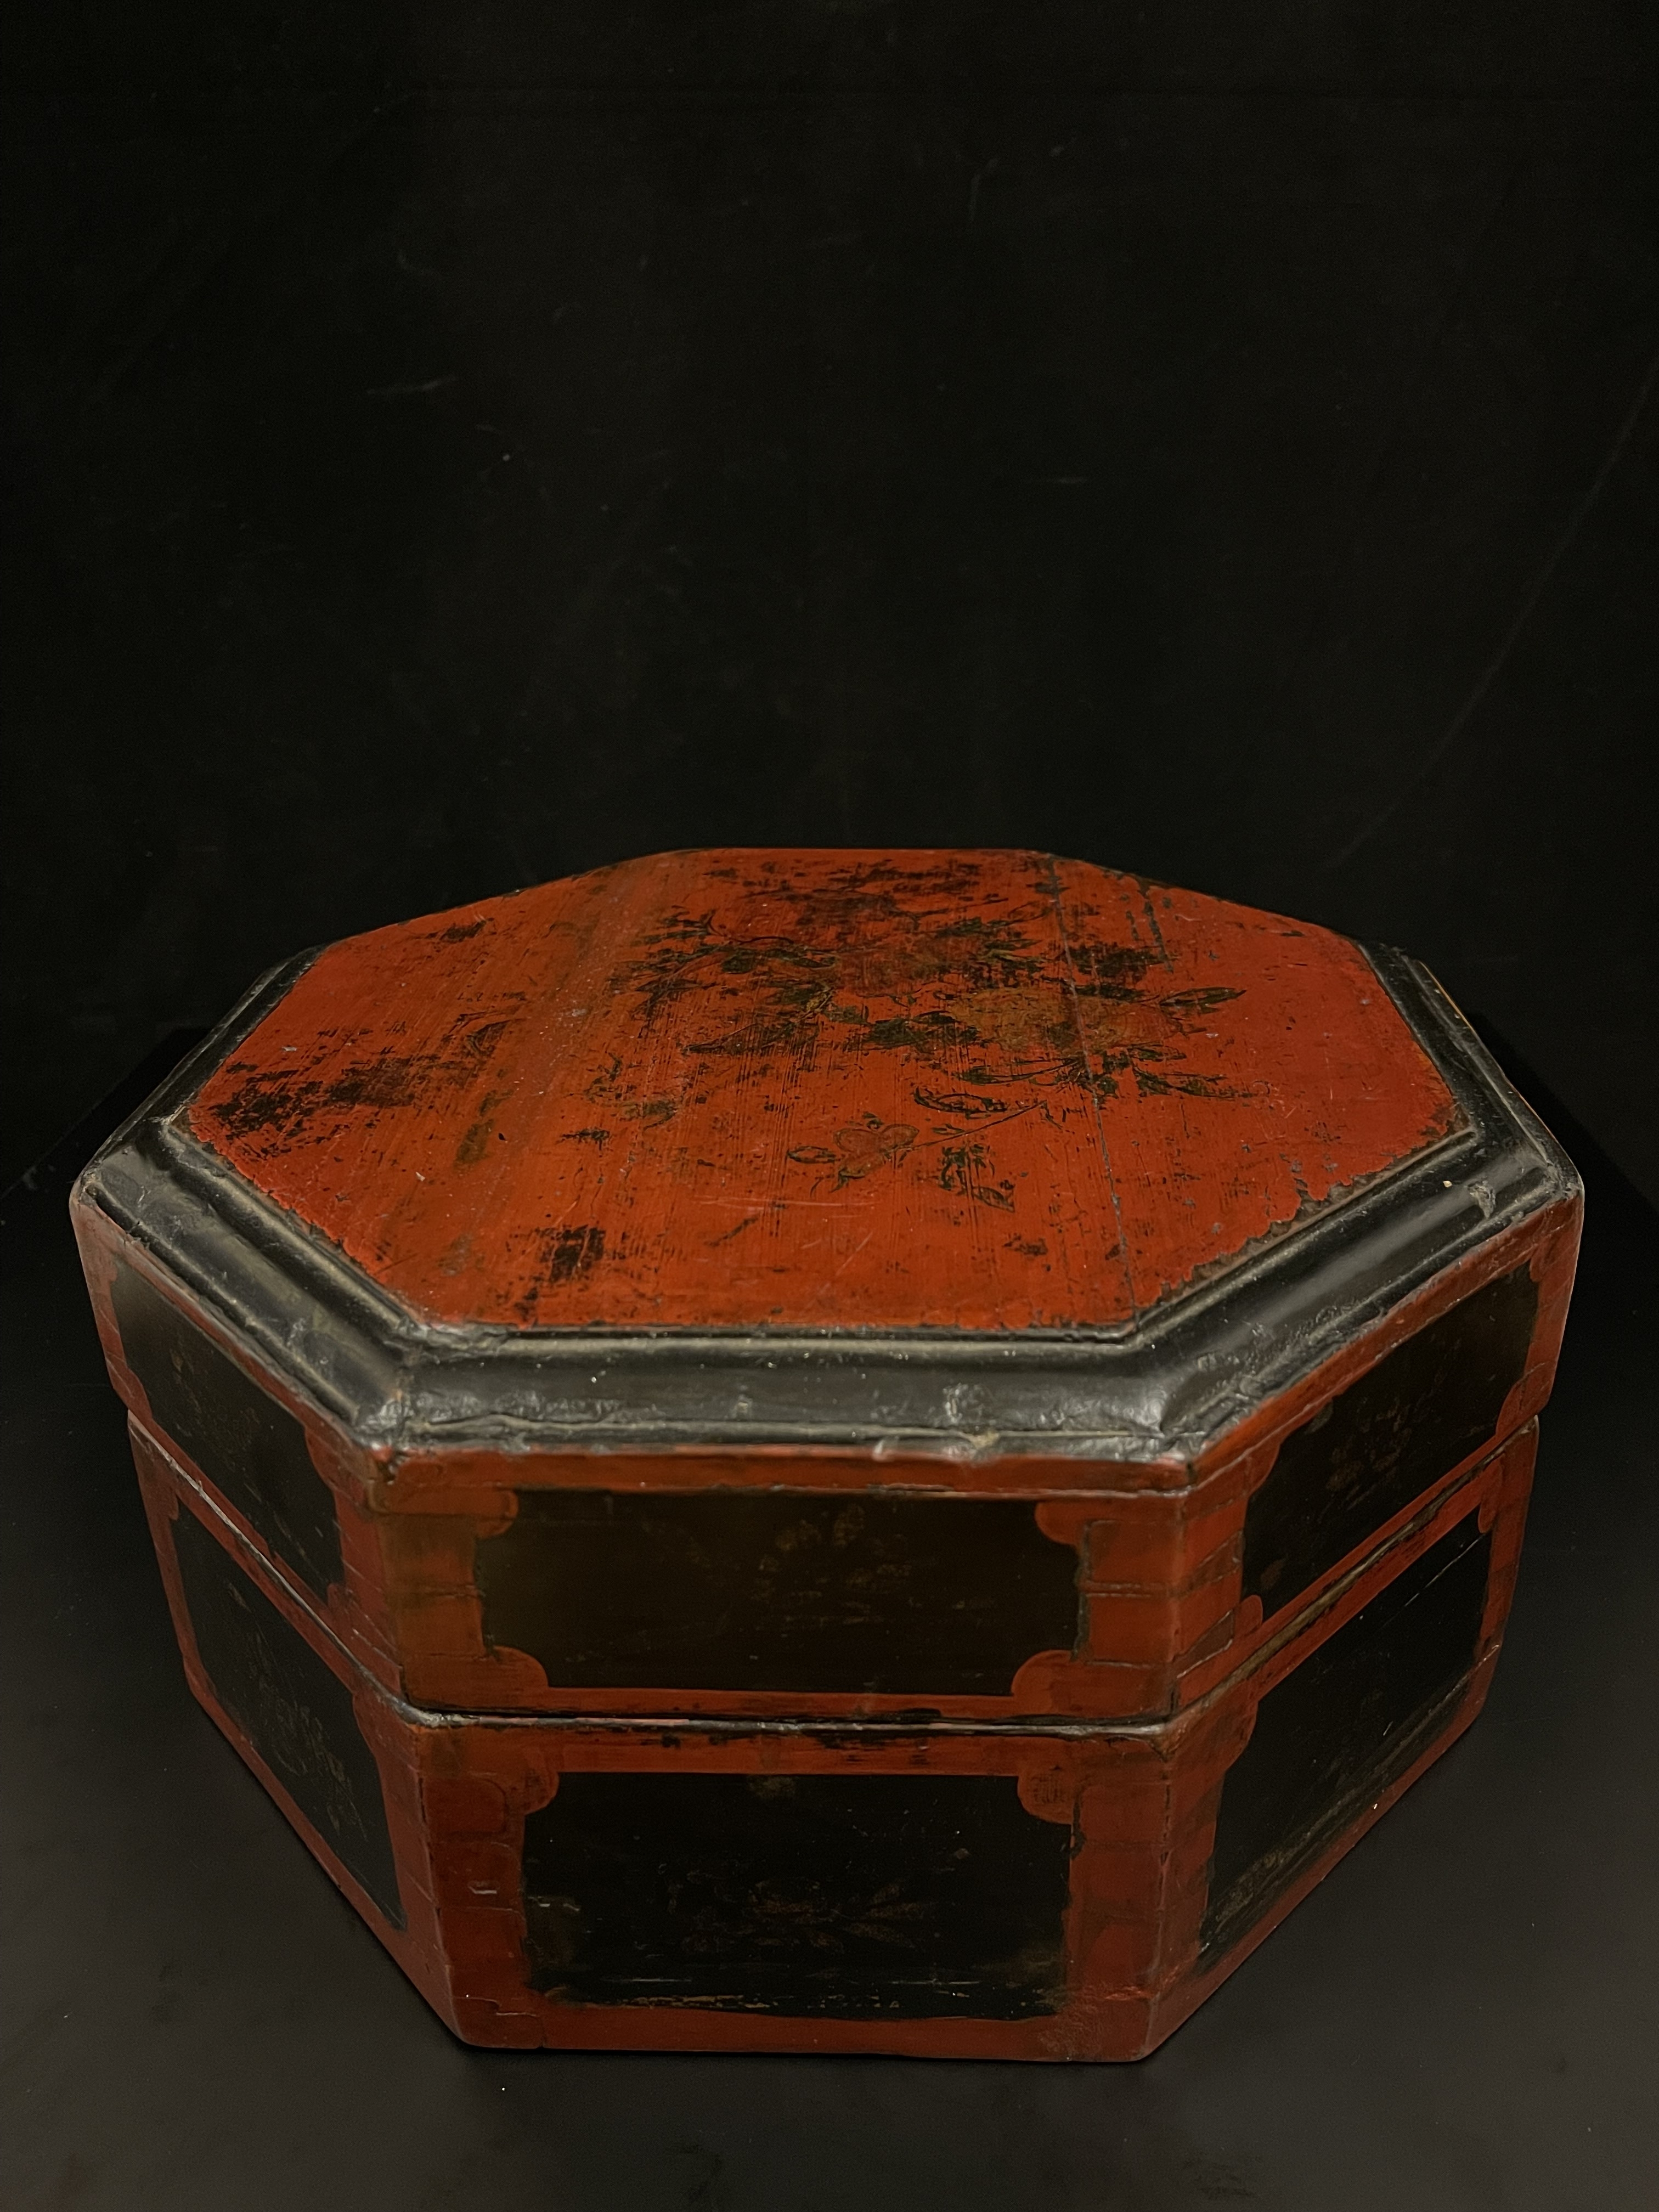 Octagonal red lacquer elm wood container- Ms16270